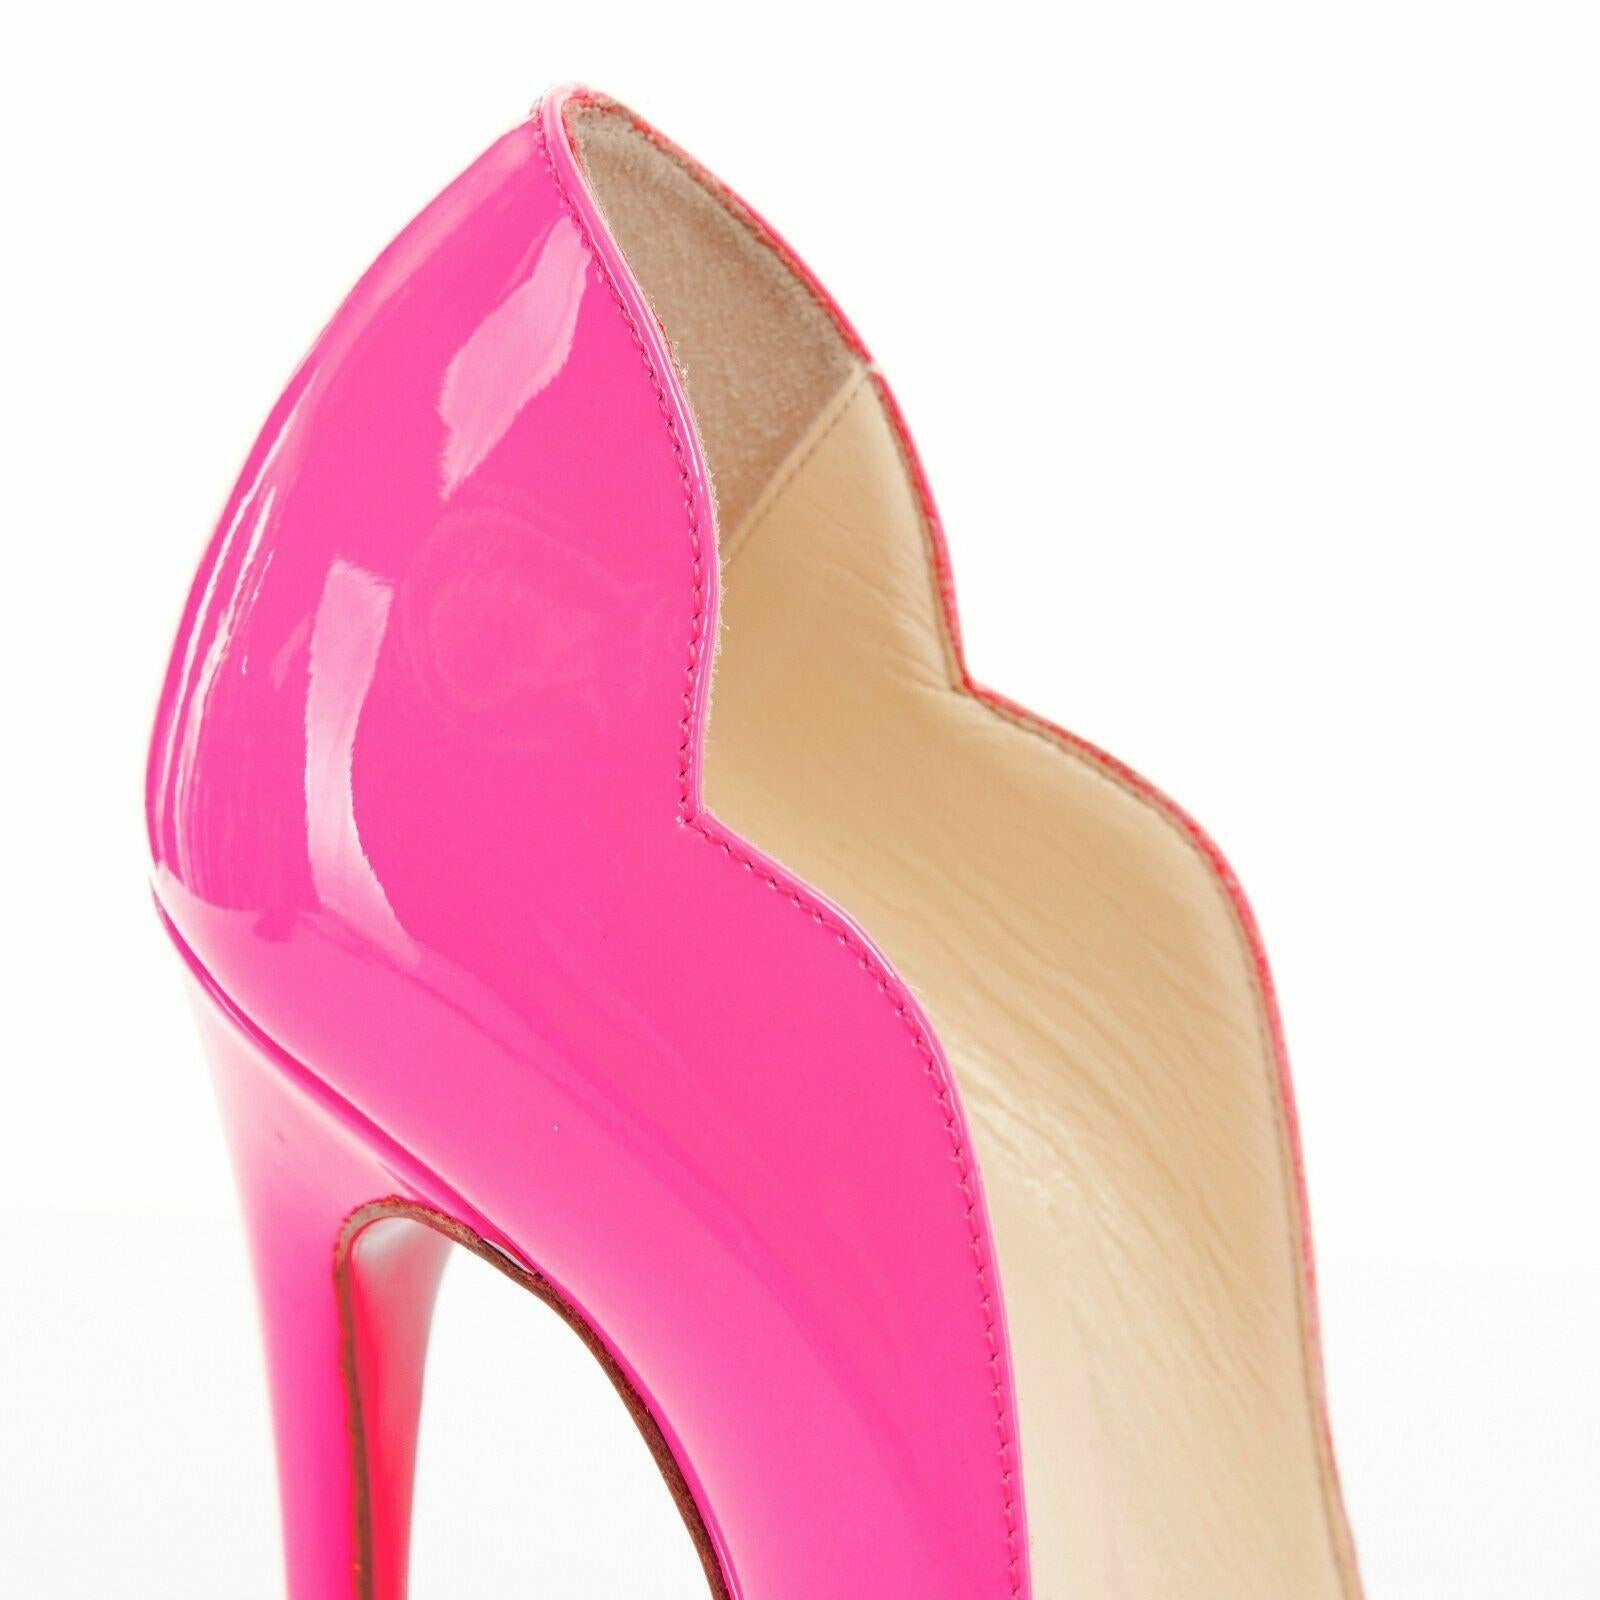 new CHRISTIAN LOUBOUTIN Hot Chick 130 neon pink patent pigalle pumps heel EU37 1